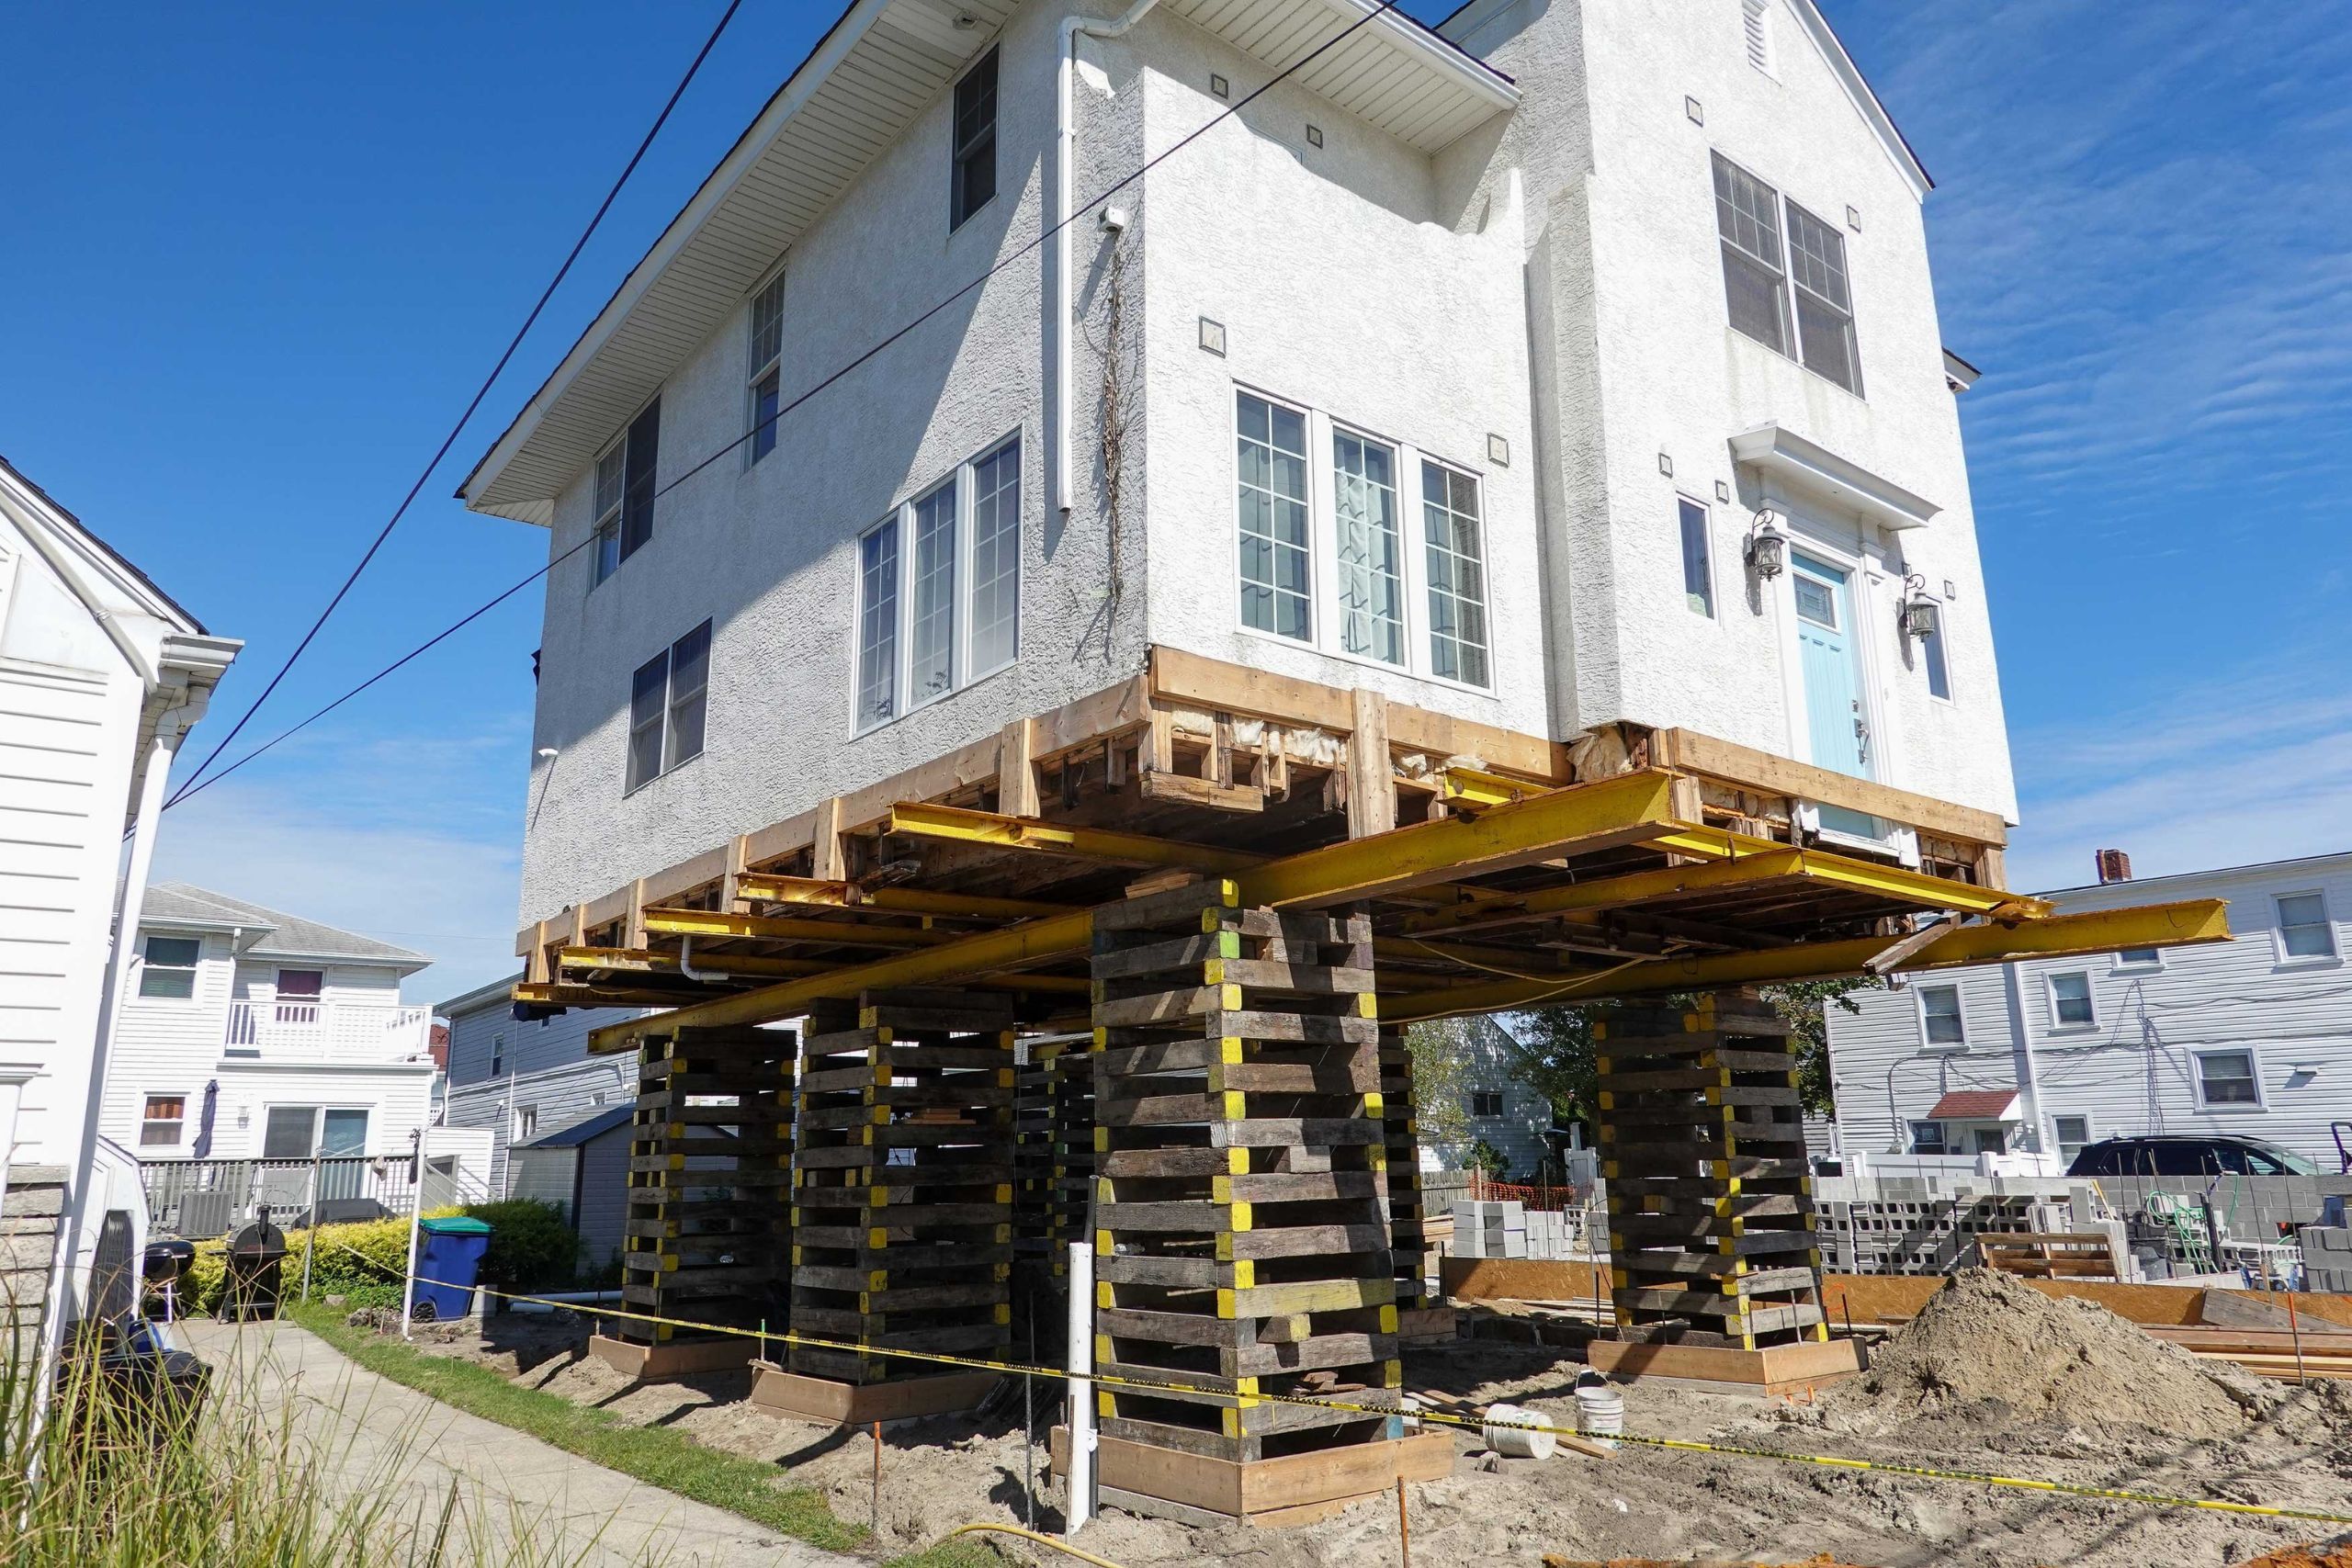 A team of professionals using specialized equipment to raise a house in Saint Augustine, preparing it for elevation and renovation